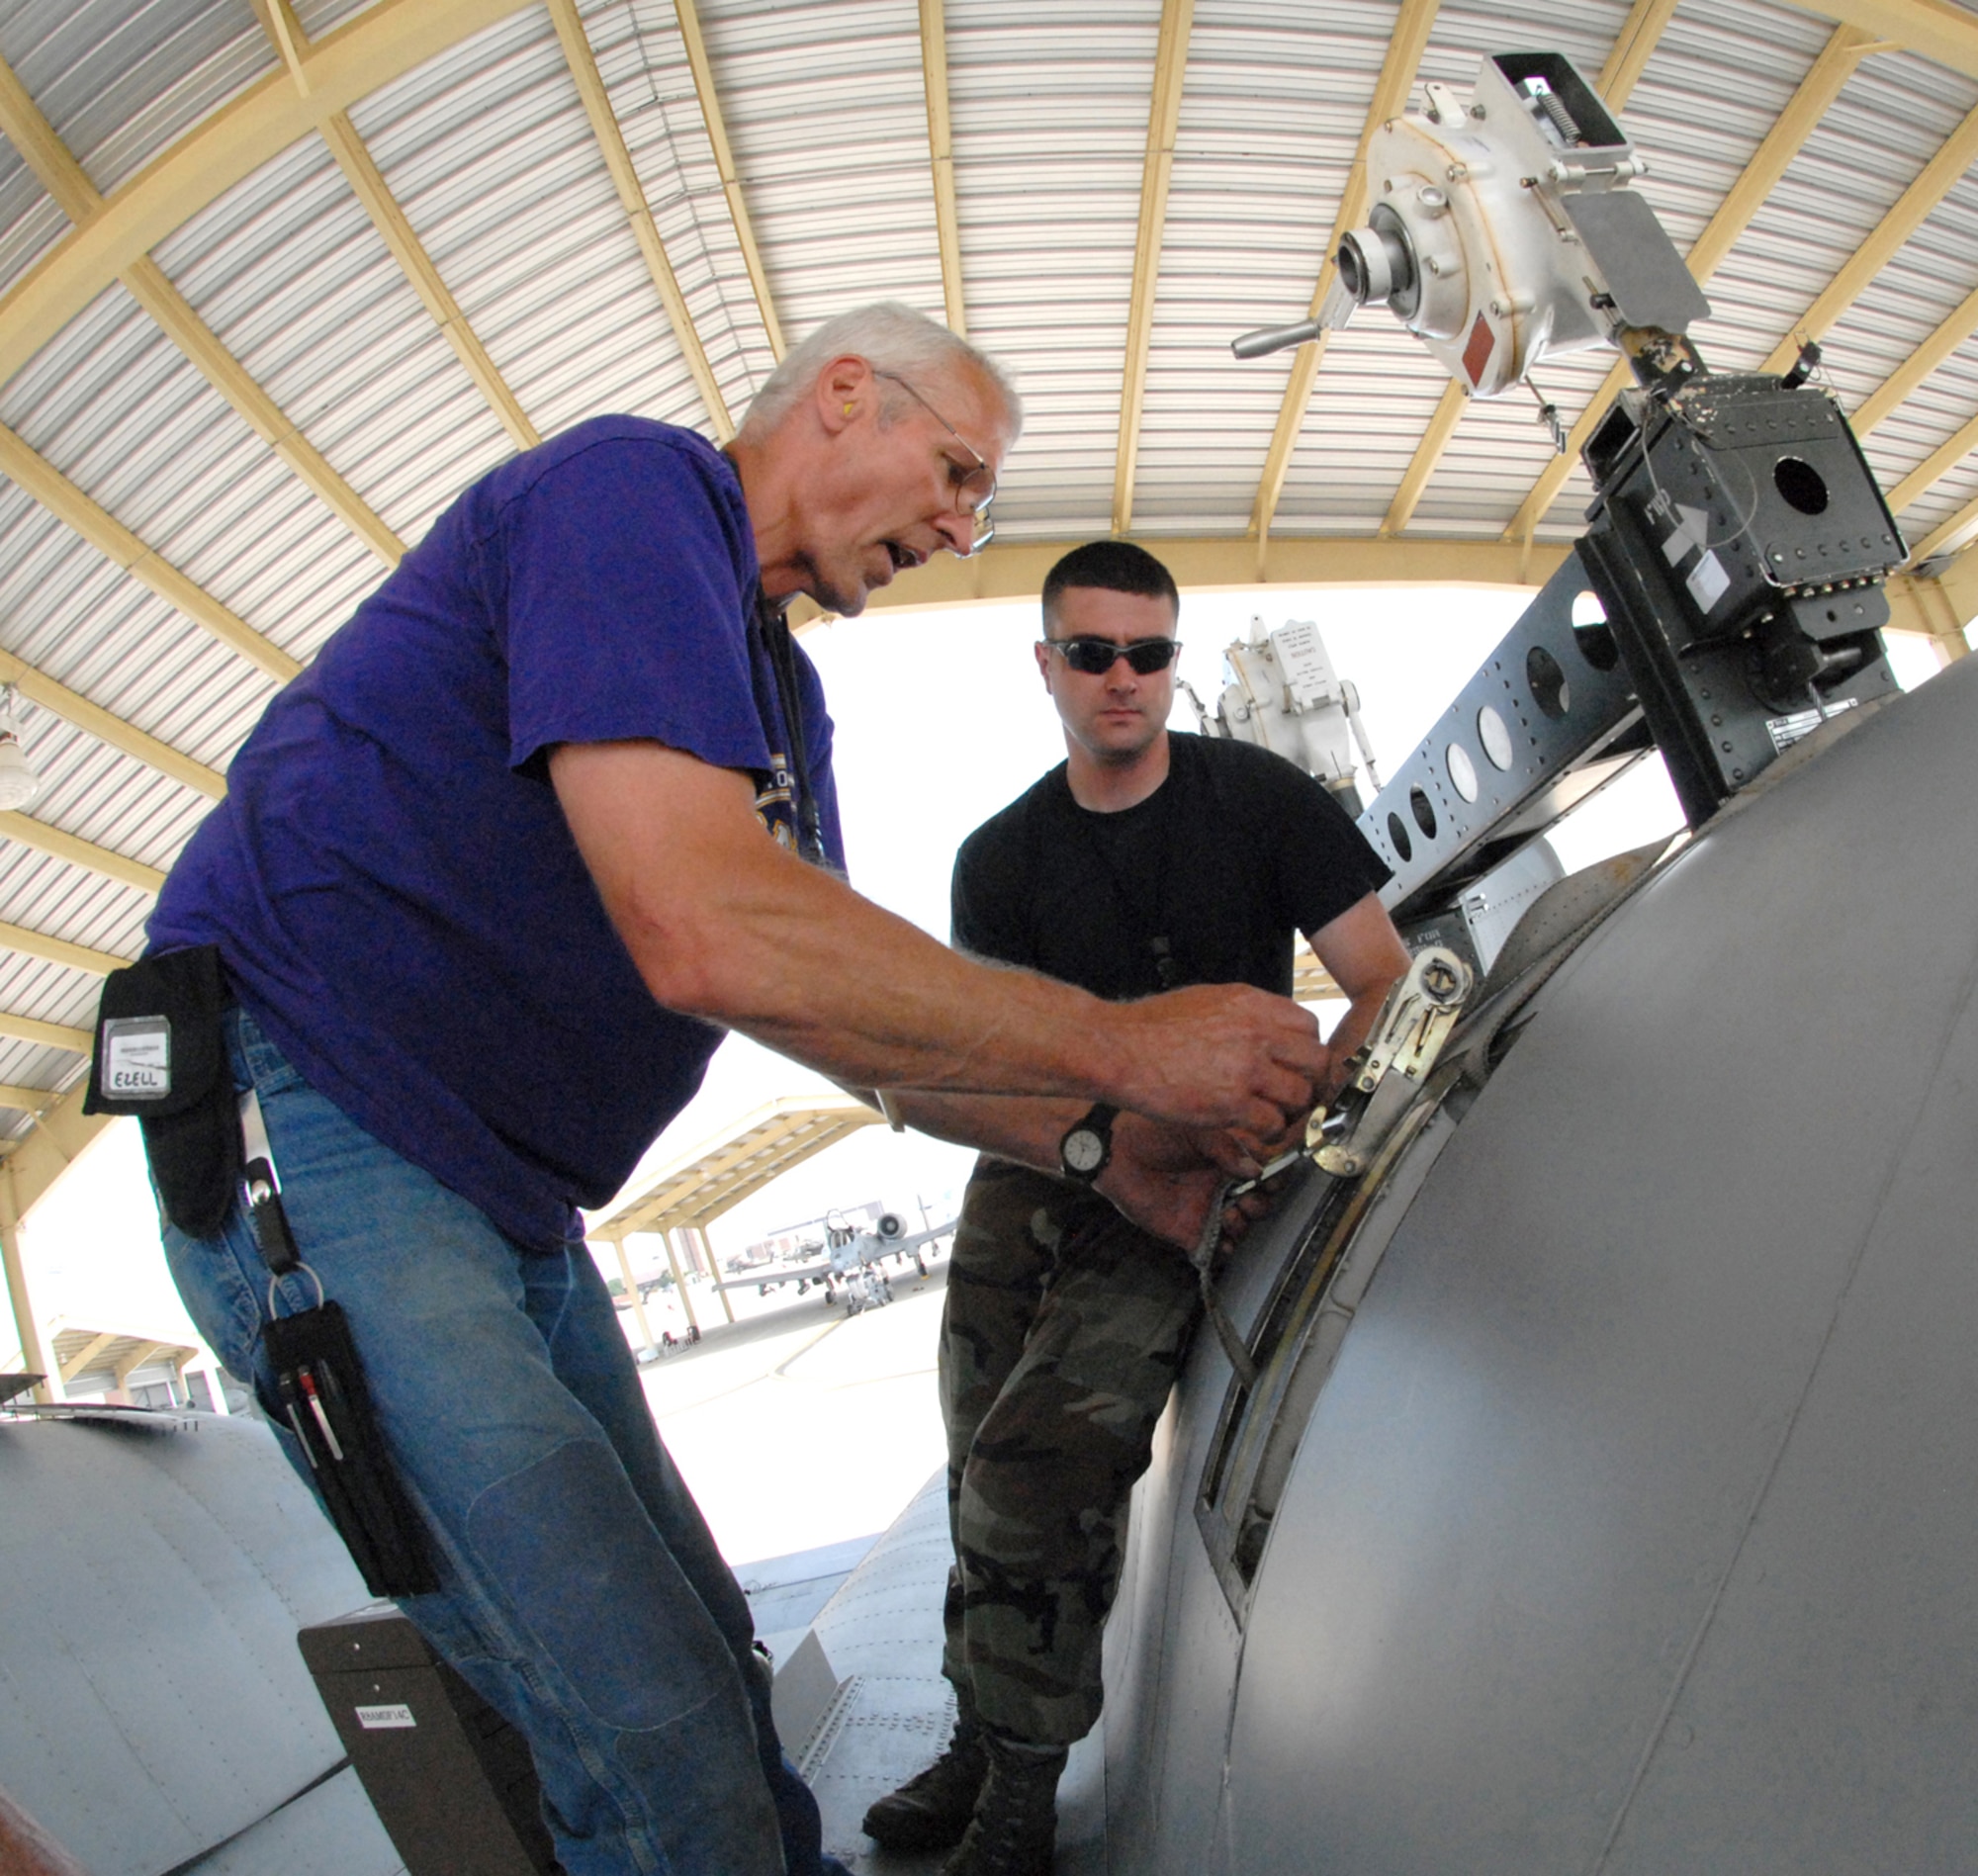 John Ezell, left, and Tech. Sgt. Aaron Berry install a safety strap prior to removing a TF-34-100A turbo-fan engine from an A-10 Thunderbolt II aircraft June 2, 2009, at Whiteman Air Force Base, Mo.  This particular engine, number 5036, set a longevity record for the 442nd Fighter Wing, after 10 years of being installed on the same aircraft, tail-number 605.  Mr. Ezell is the crew chief for A-10, number 605, and Sergeant Berry is also a crew chief in the 442nd Aircraft Maintenance Squadron.  The 442nd is an Air Force Reserve unit based at Whiteman.  (U.S. Air Force photo/Master Sgt. Bill Huntington)